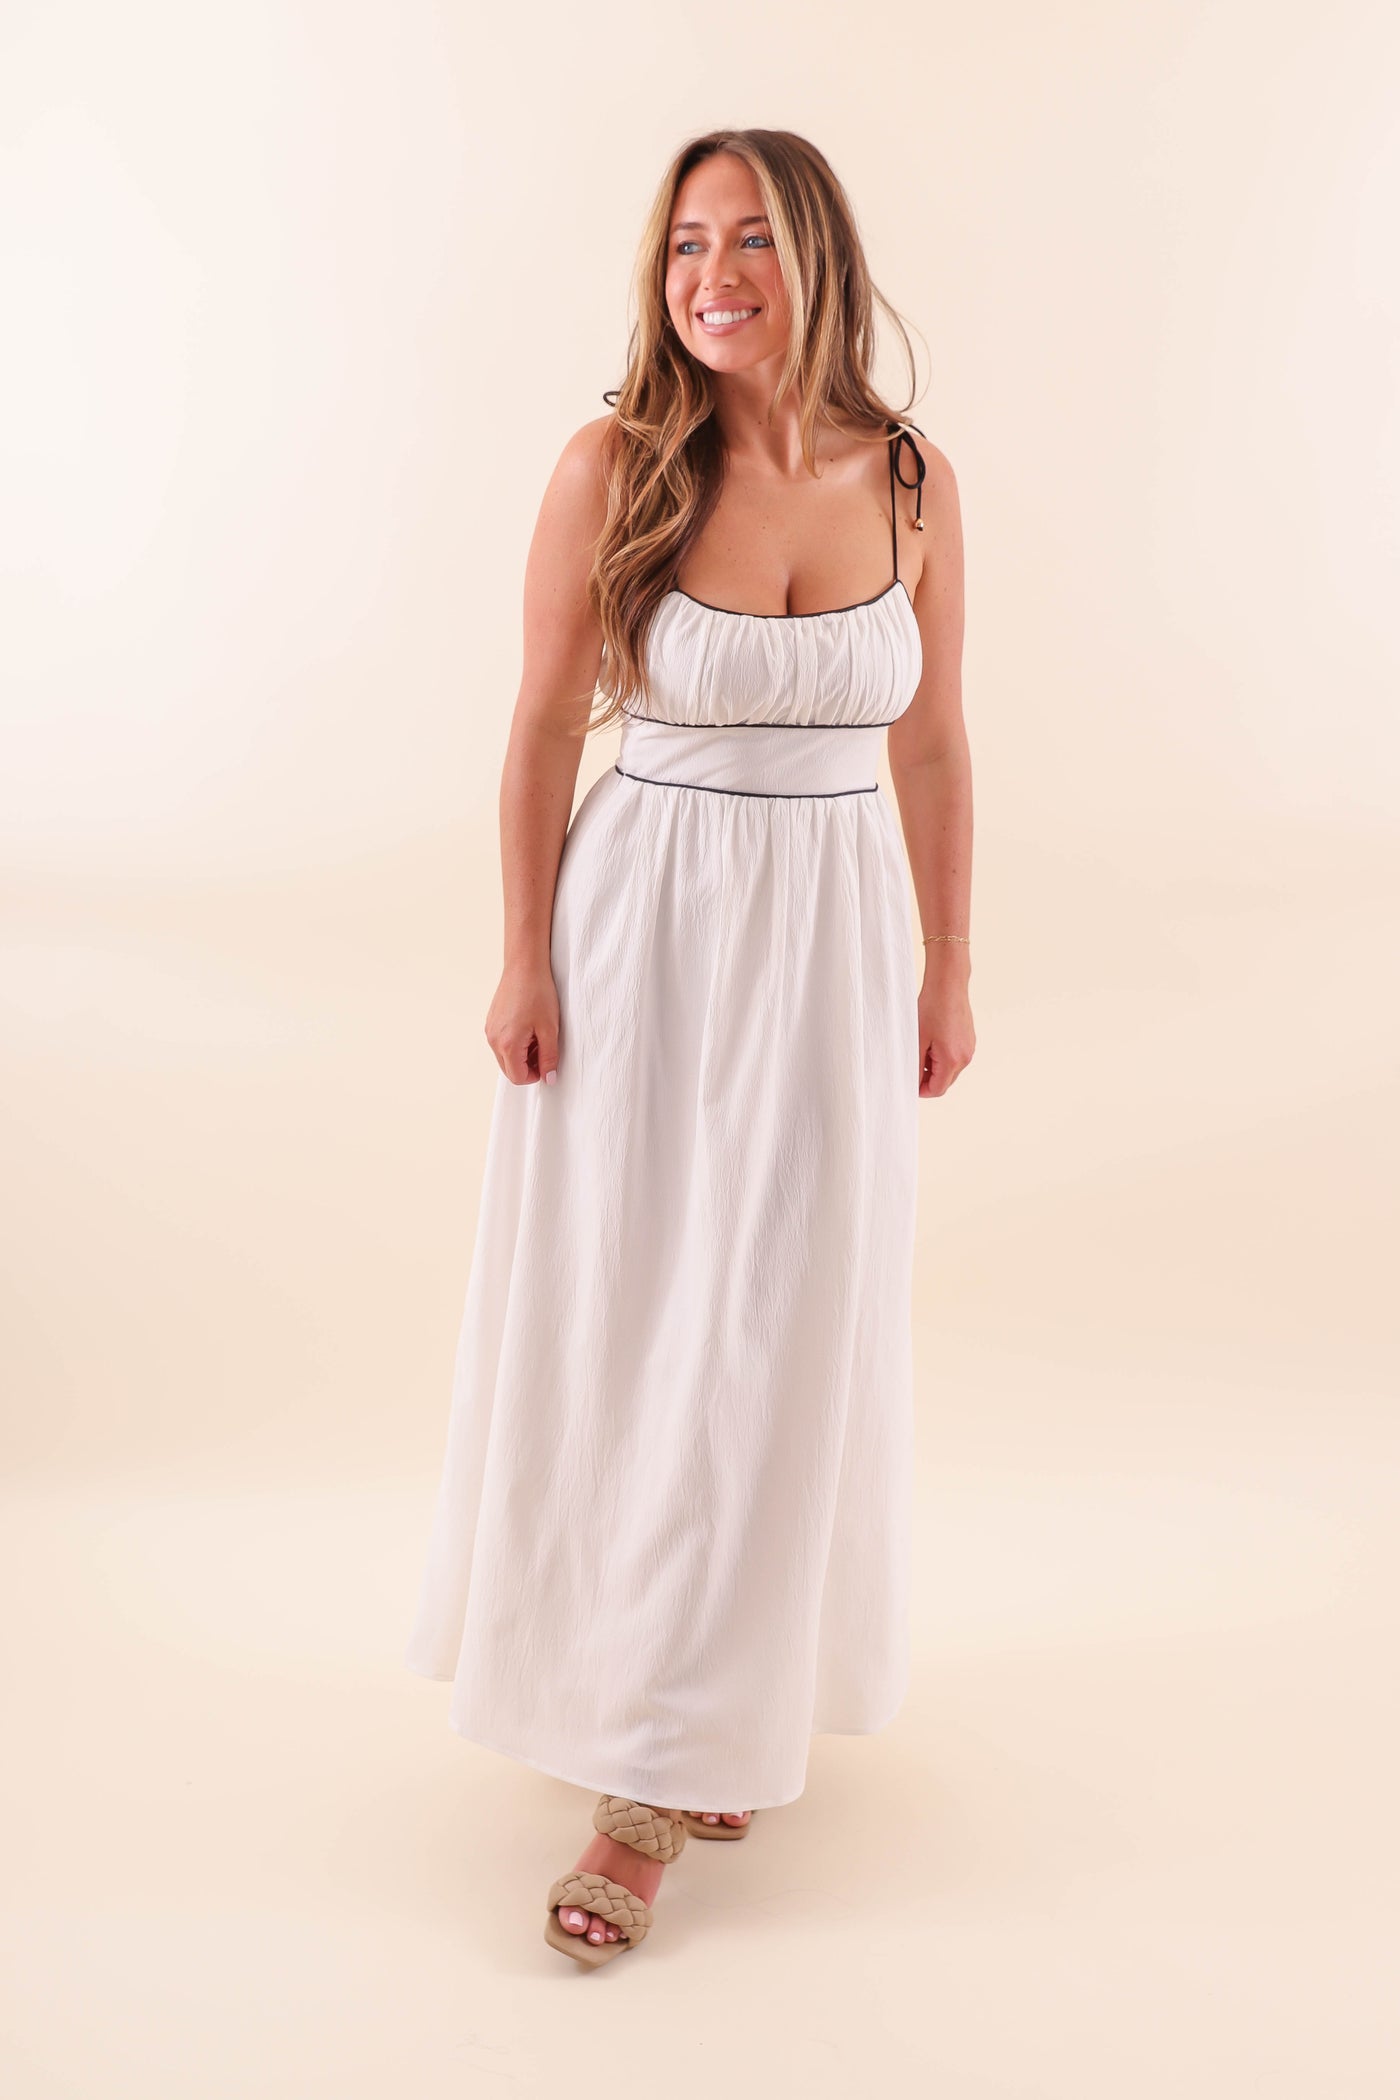 White Maxi Dress with Black Piping Contrast - Solid White Maxi With Black Stripes